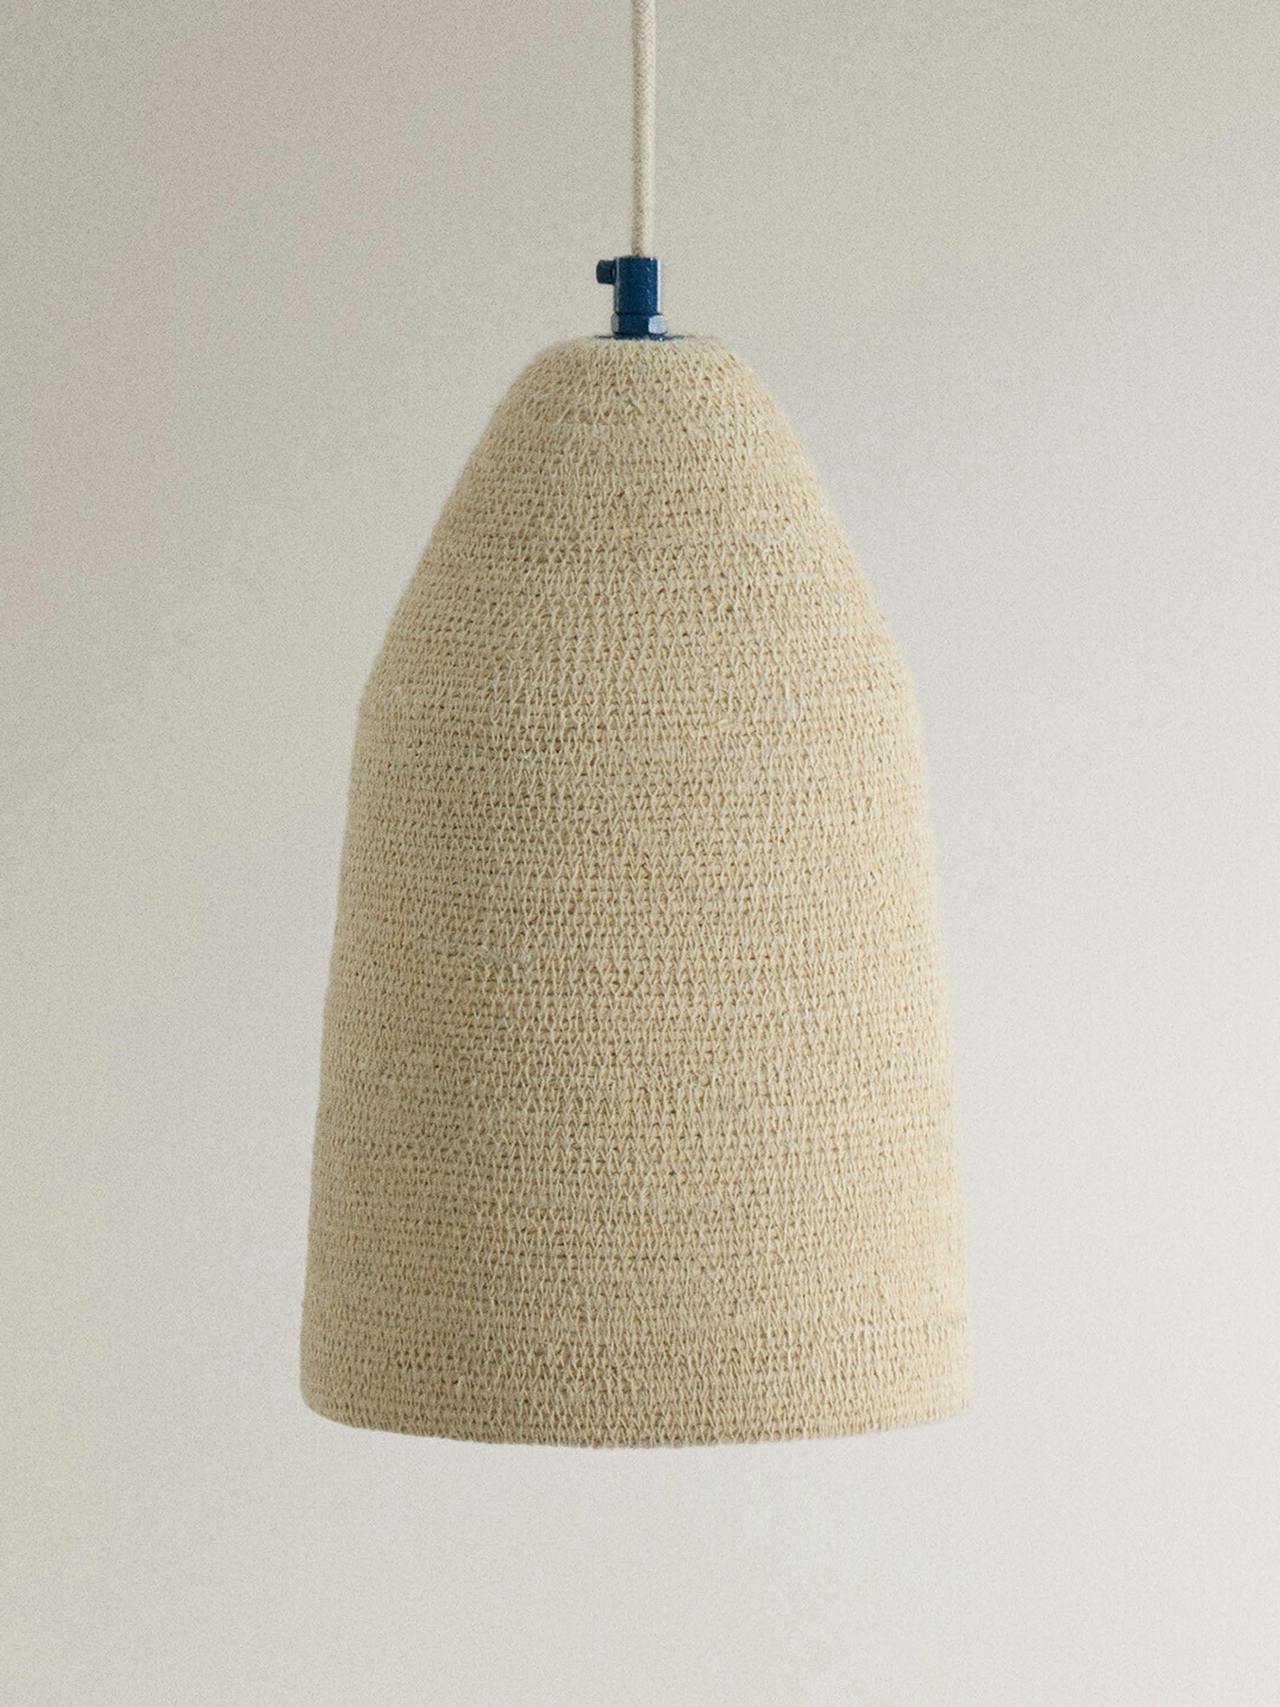 Conical seagrass ceiling lamp